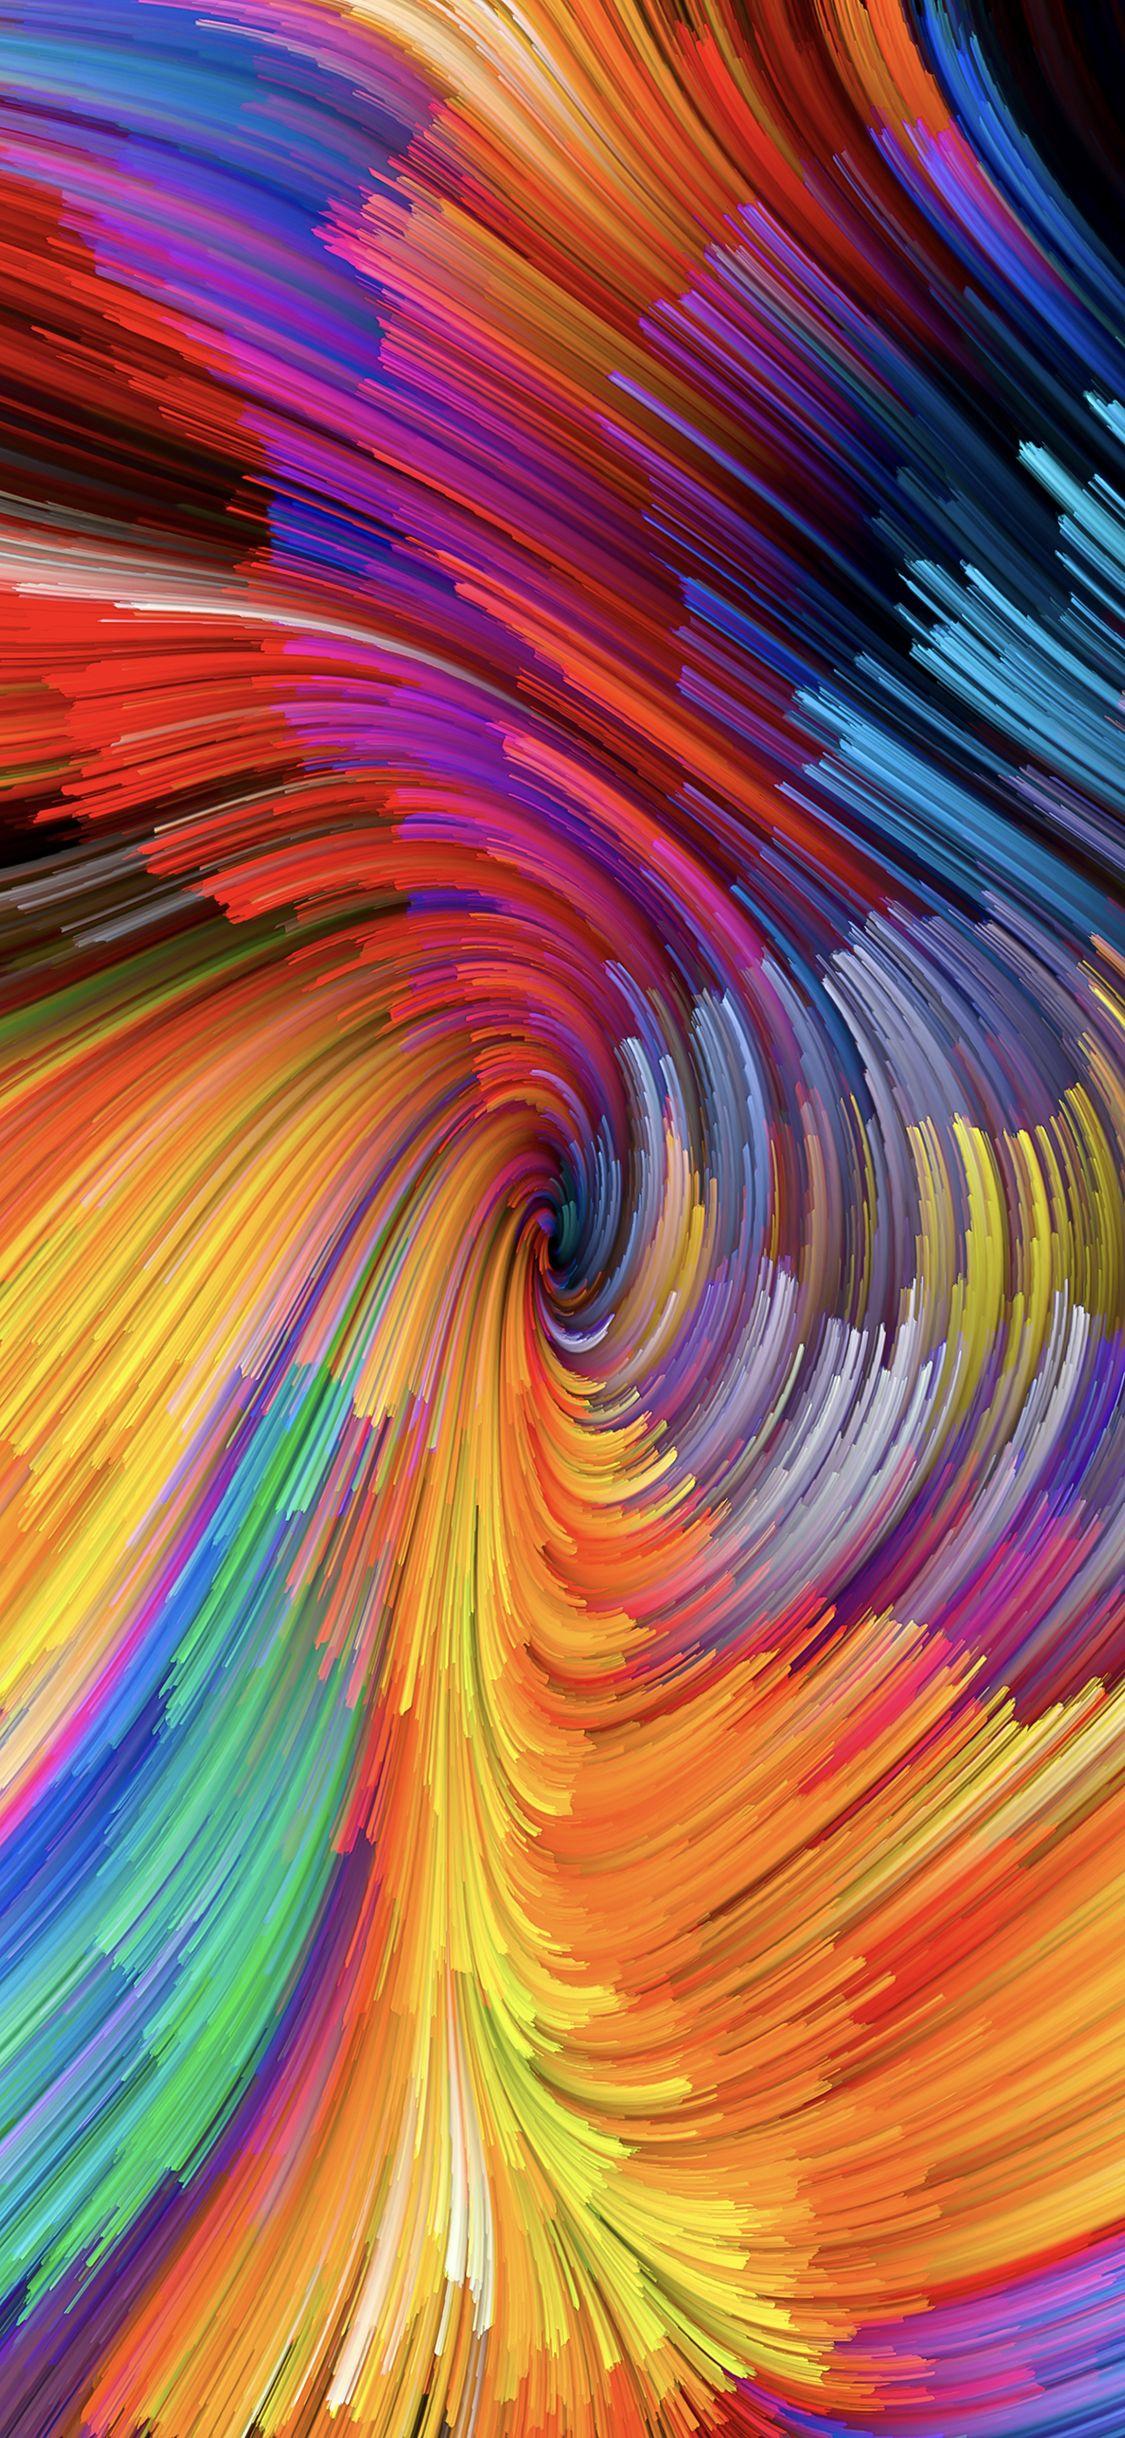 A swirl of fibers from macOS Mojave. Painting wallpaper, Abstract wallpaper, Phone wallpaper